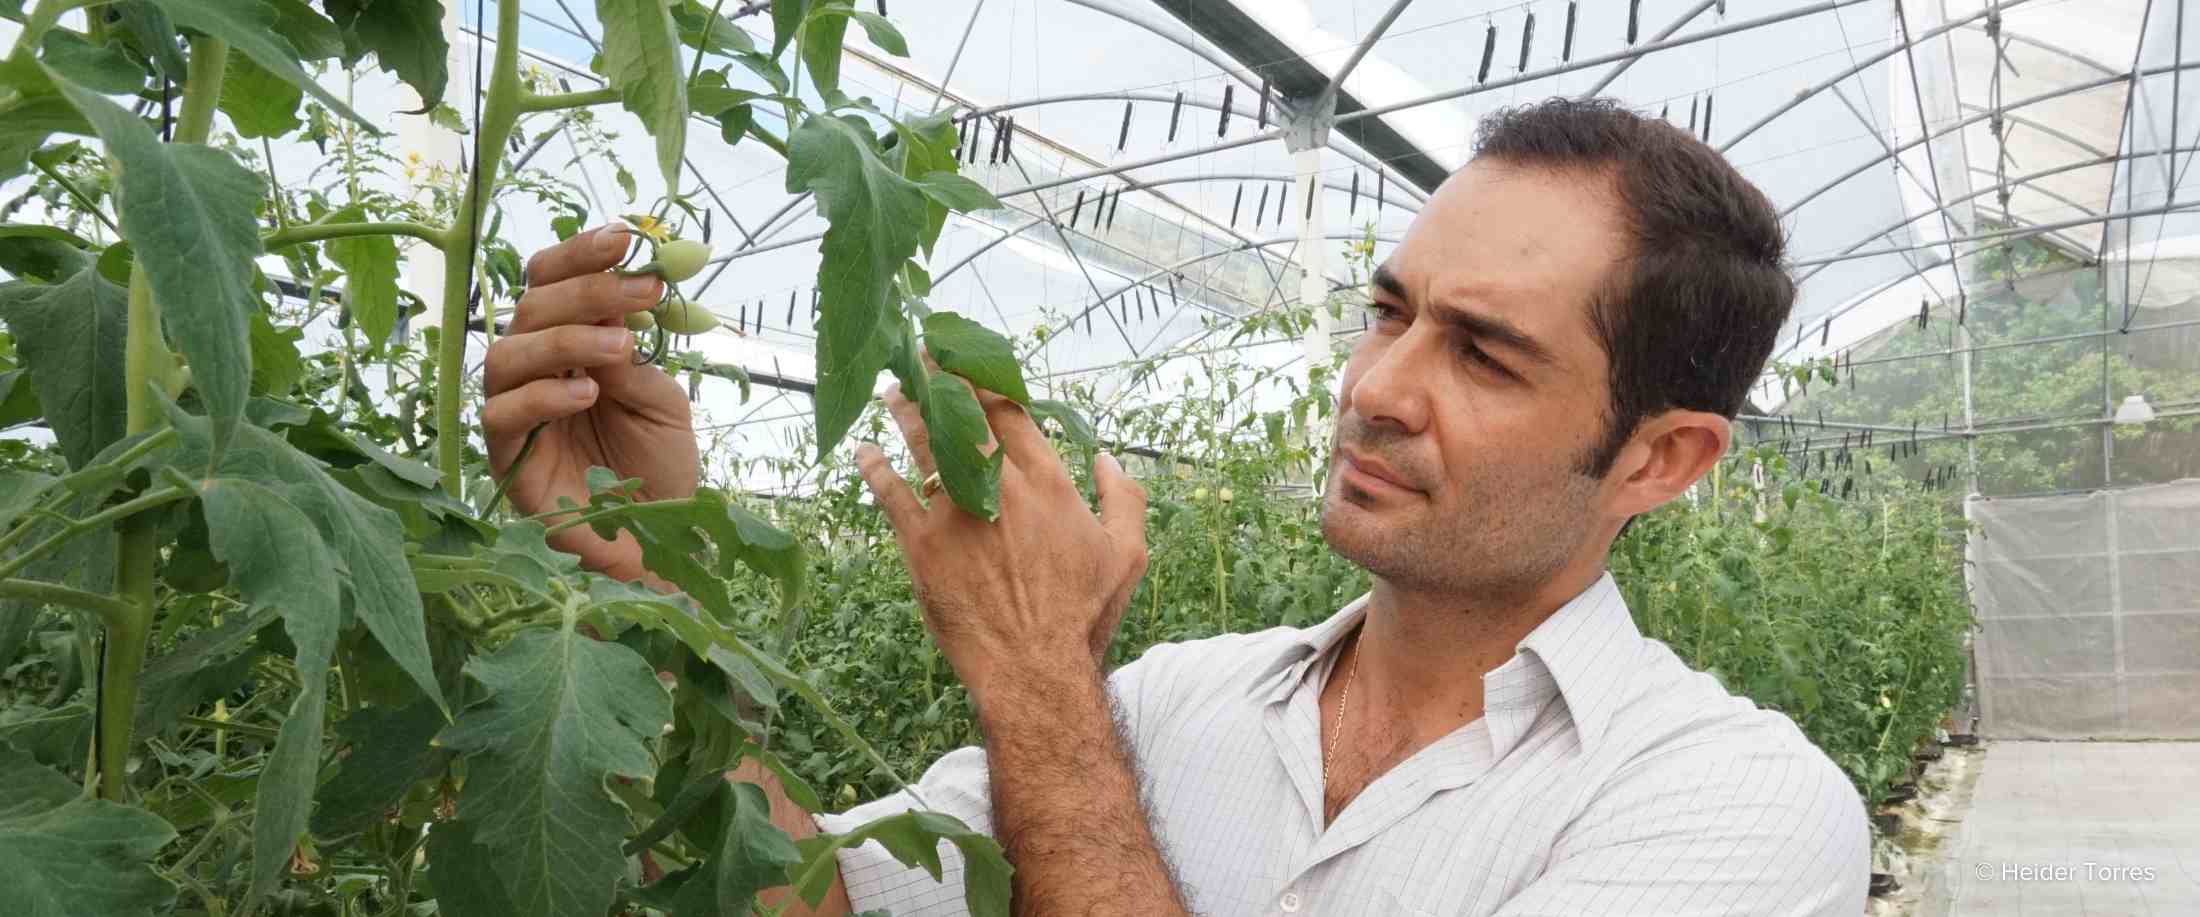 Greenhouse director, Alejandro Alvarez, shows the work he has done to produce sustainable food through the MARTI program.